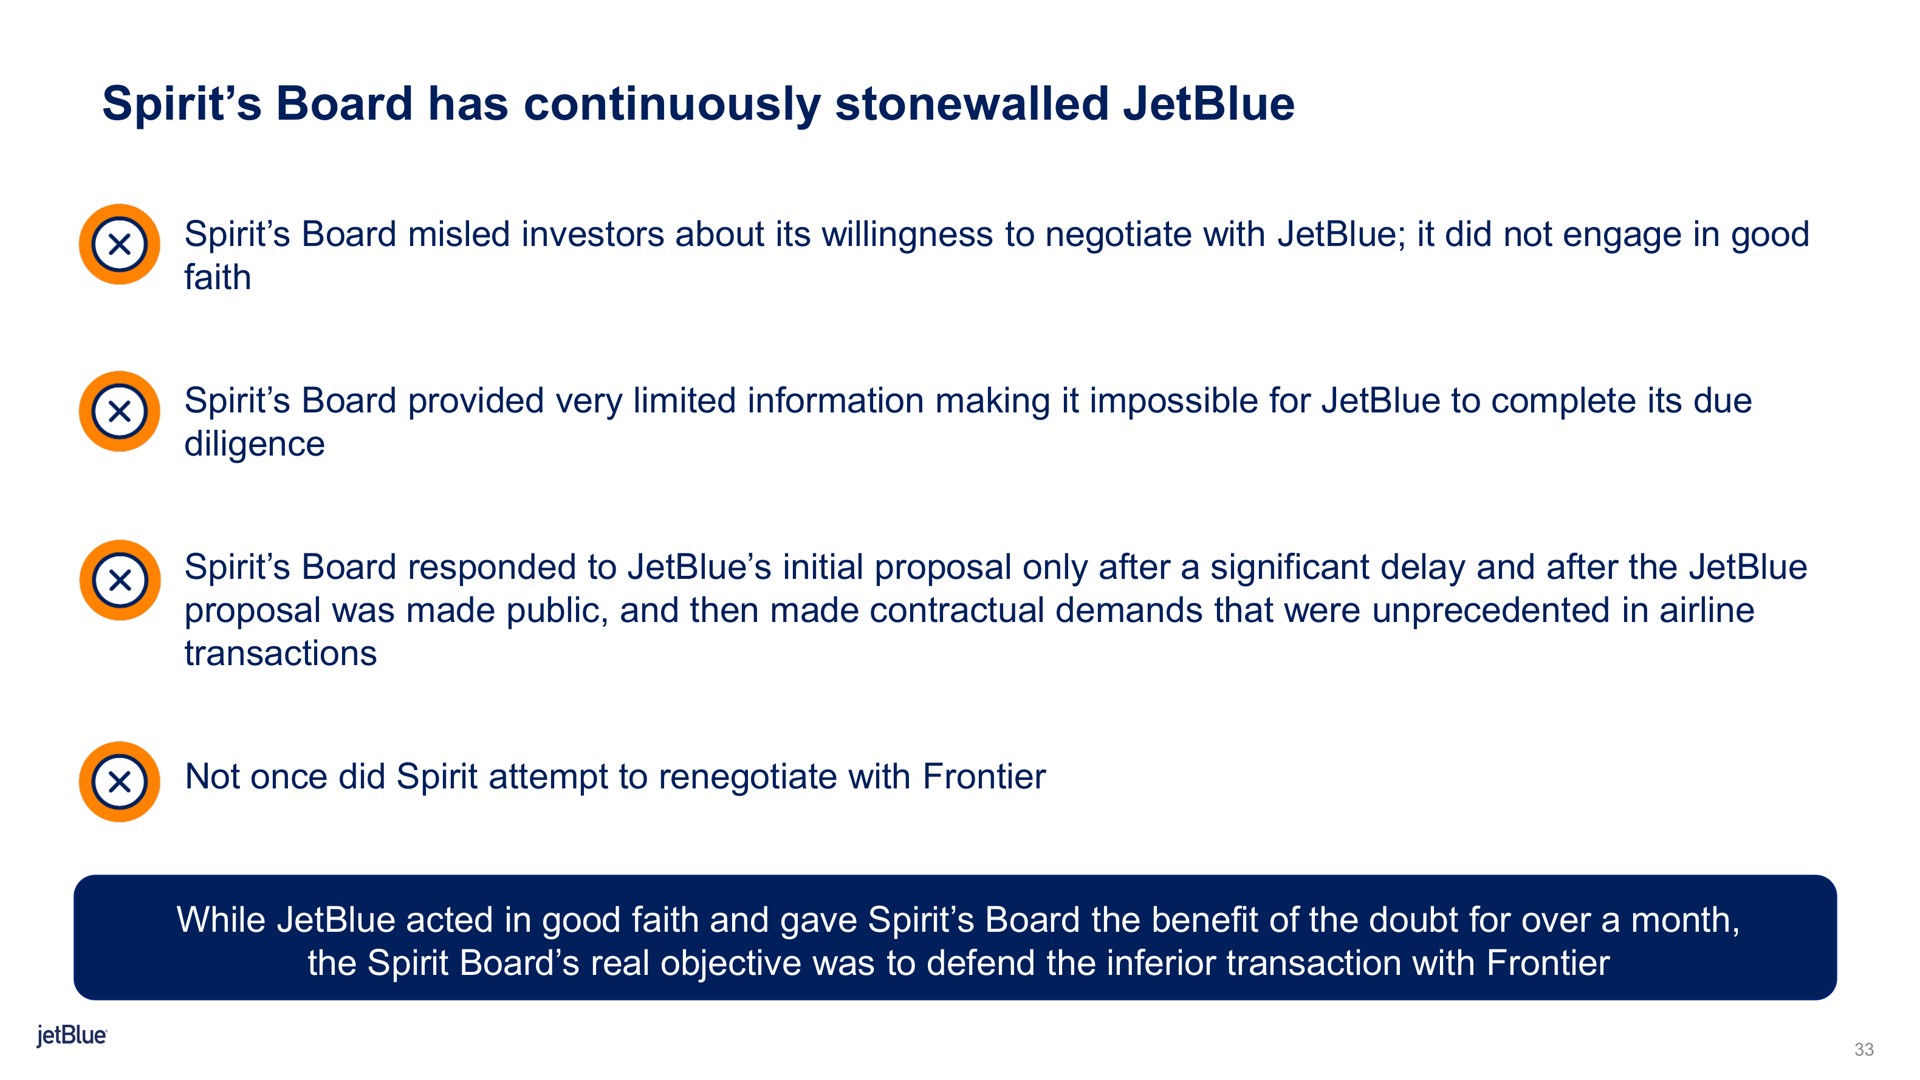 spirit board has continuously stonewalled | jetBlue